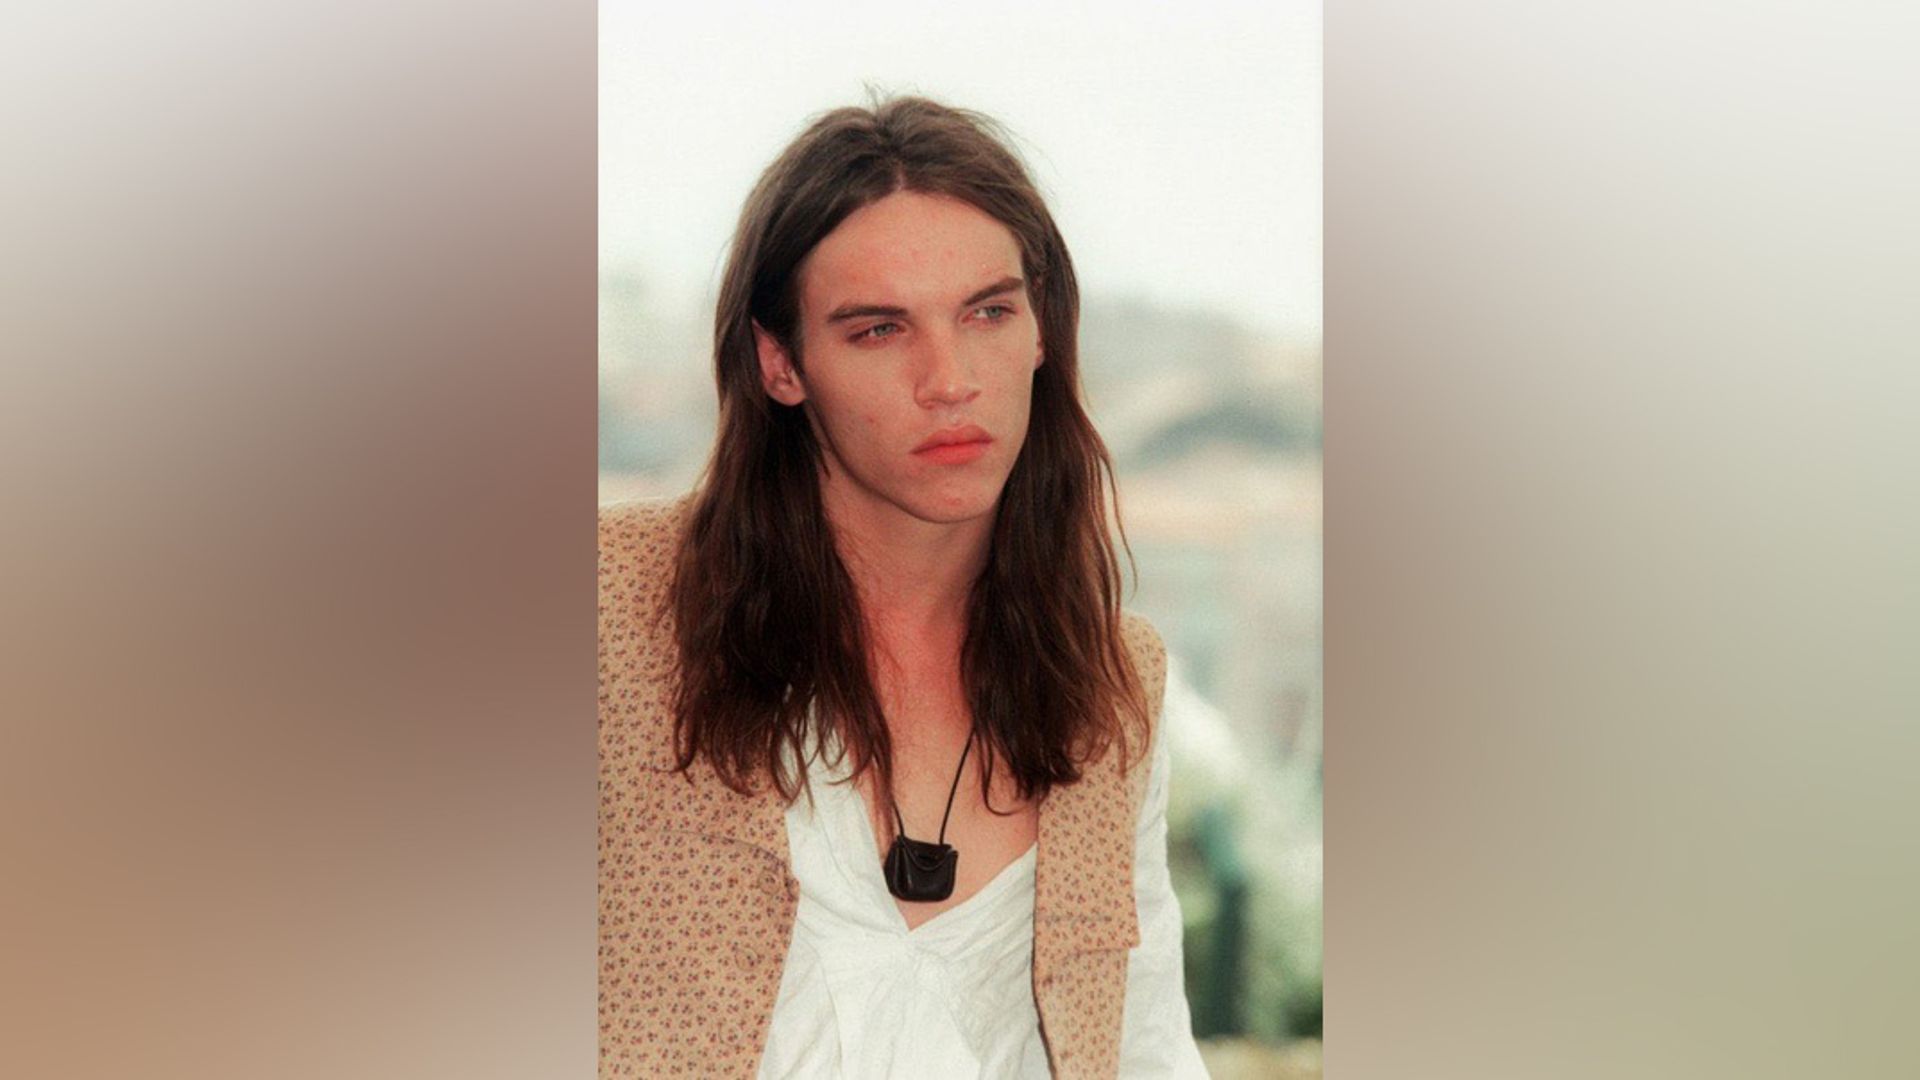 Jonathan Rhys Meyers in his youth